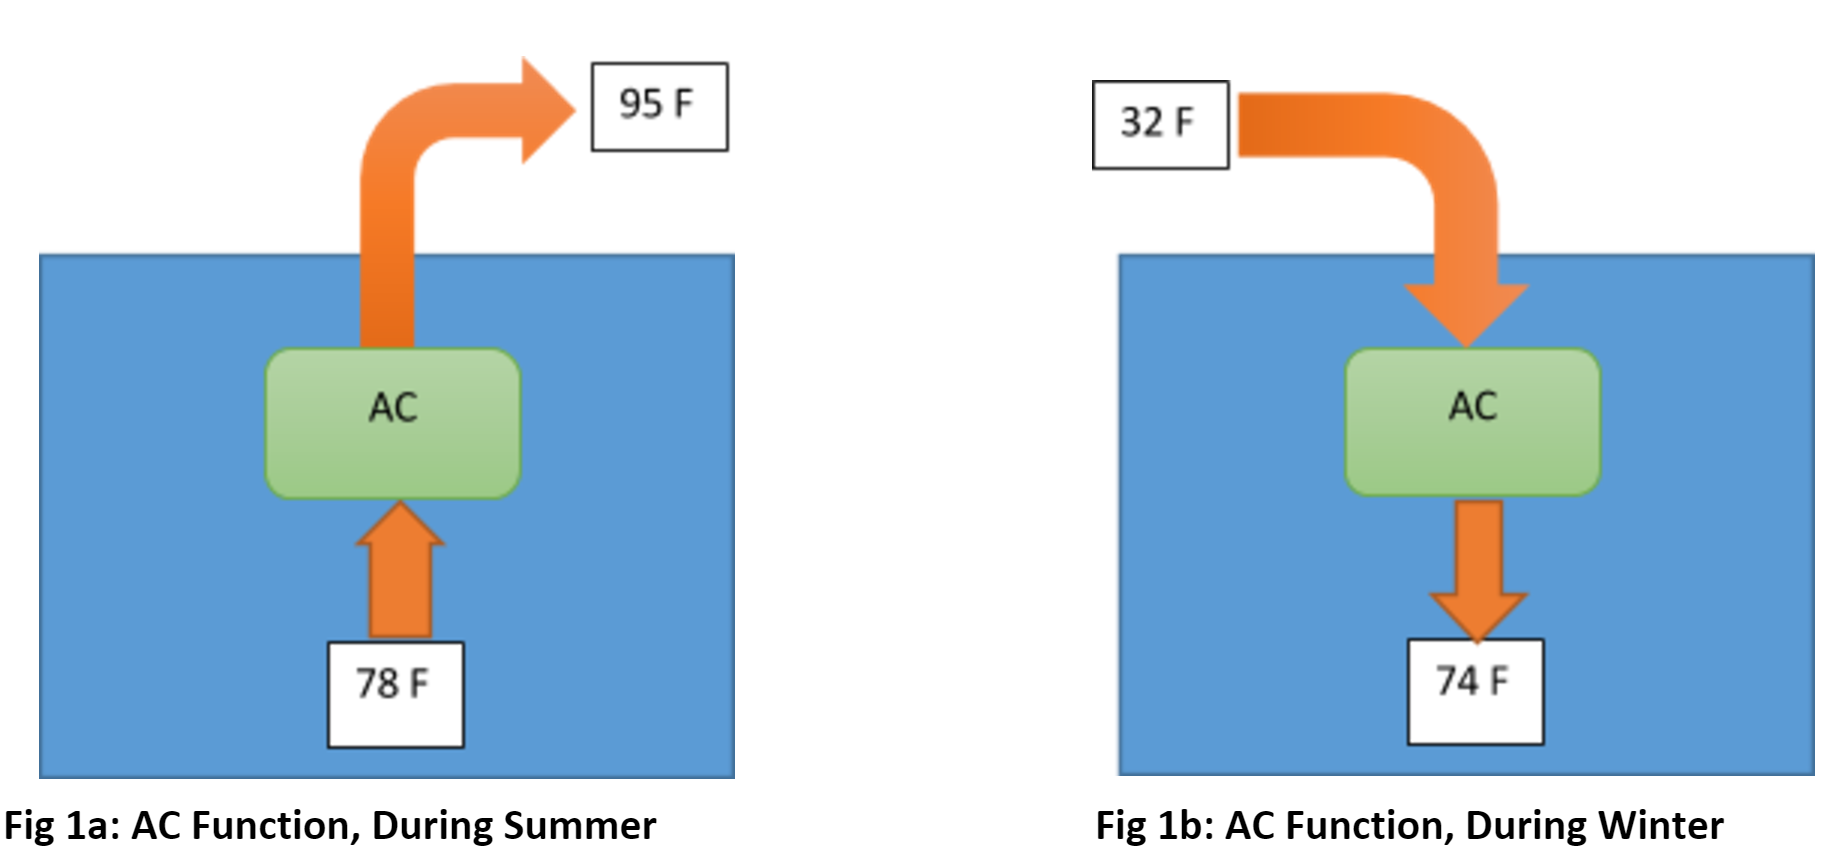 AC function during summer and winter